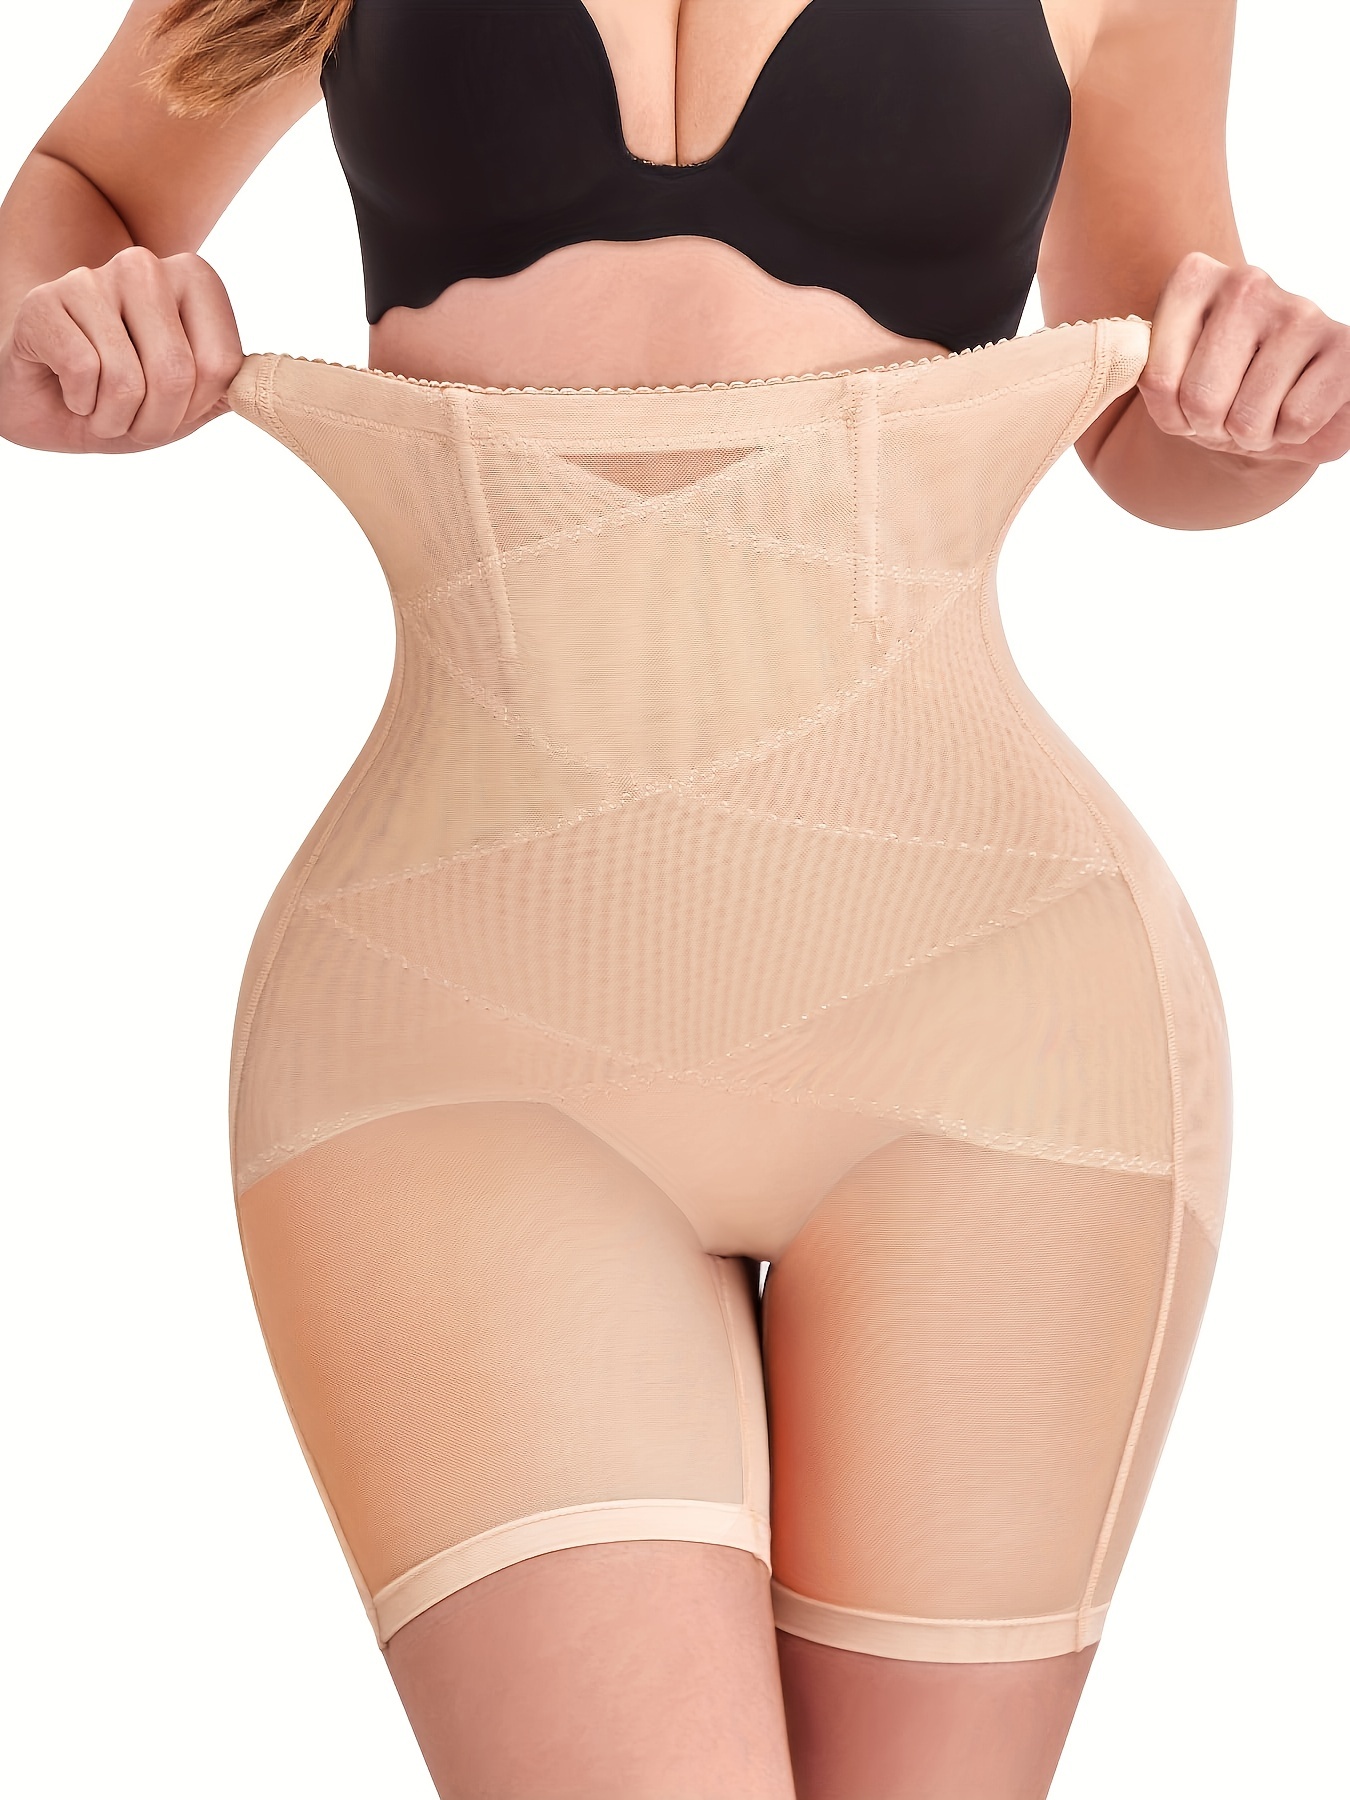 Women Waist Trainer Tummy Control Panties Body Shaper High Waisted Shapewear  Briefs Butt Lifter Slimming Corset Seamless (Beige, X-Small-Small) at   Women's Clothing store